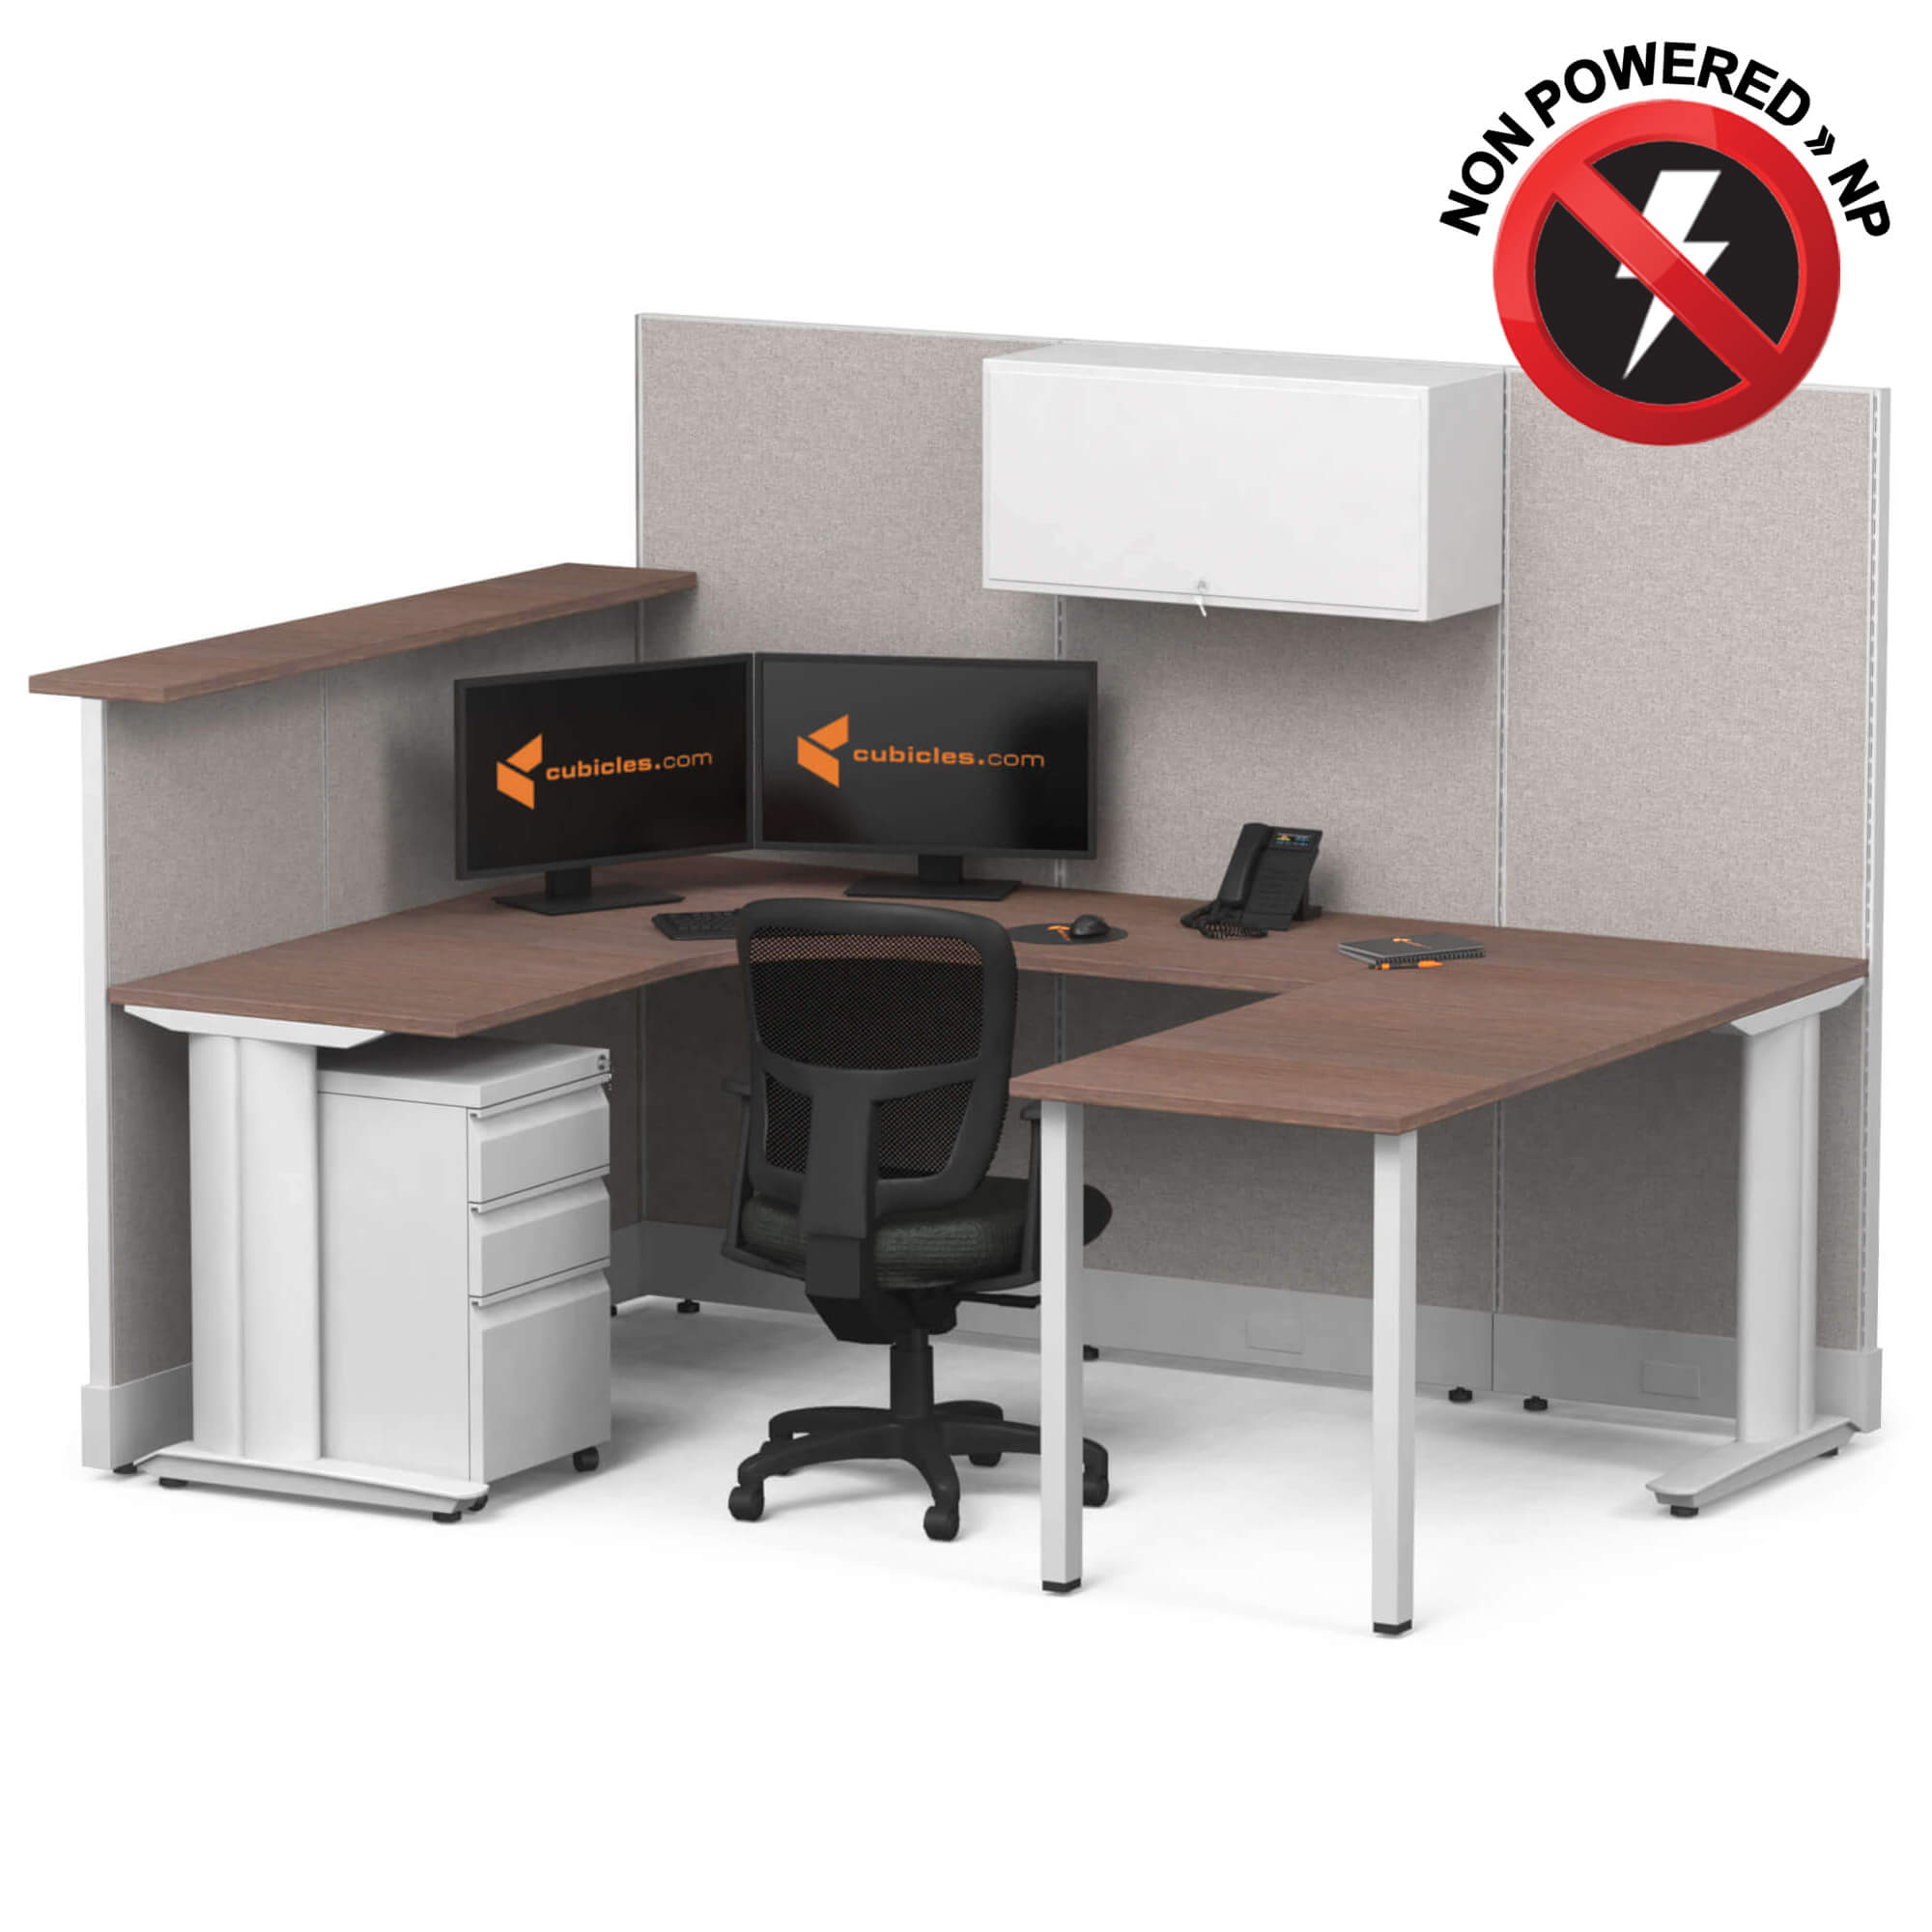 cubicle-desk-u-shaped-workstation-non-powered-with-transaction-top-and-storage-sign.jpg